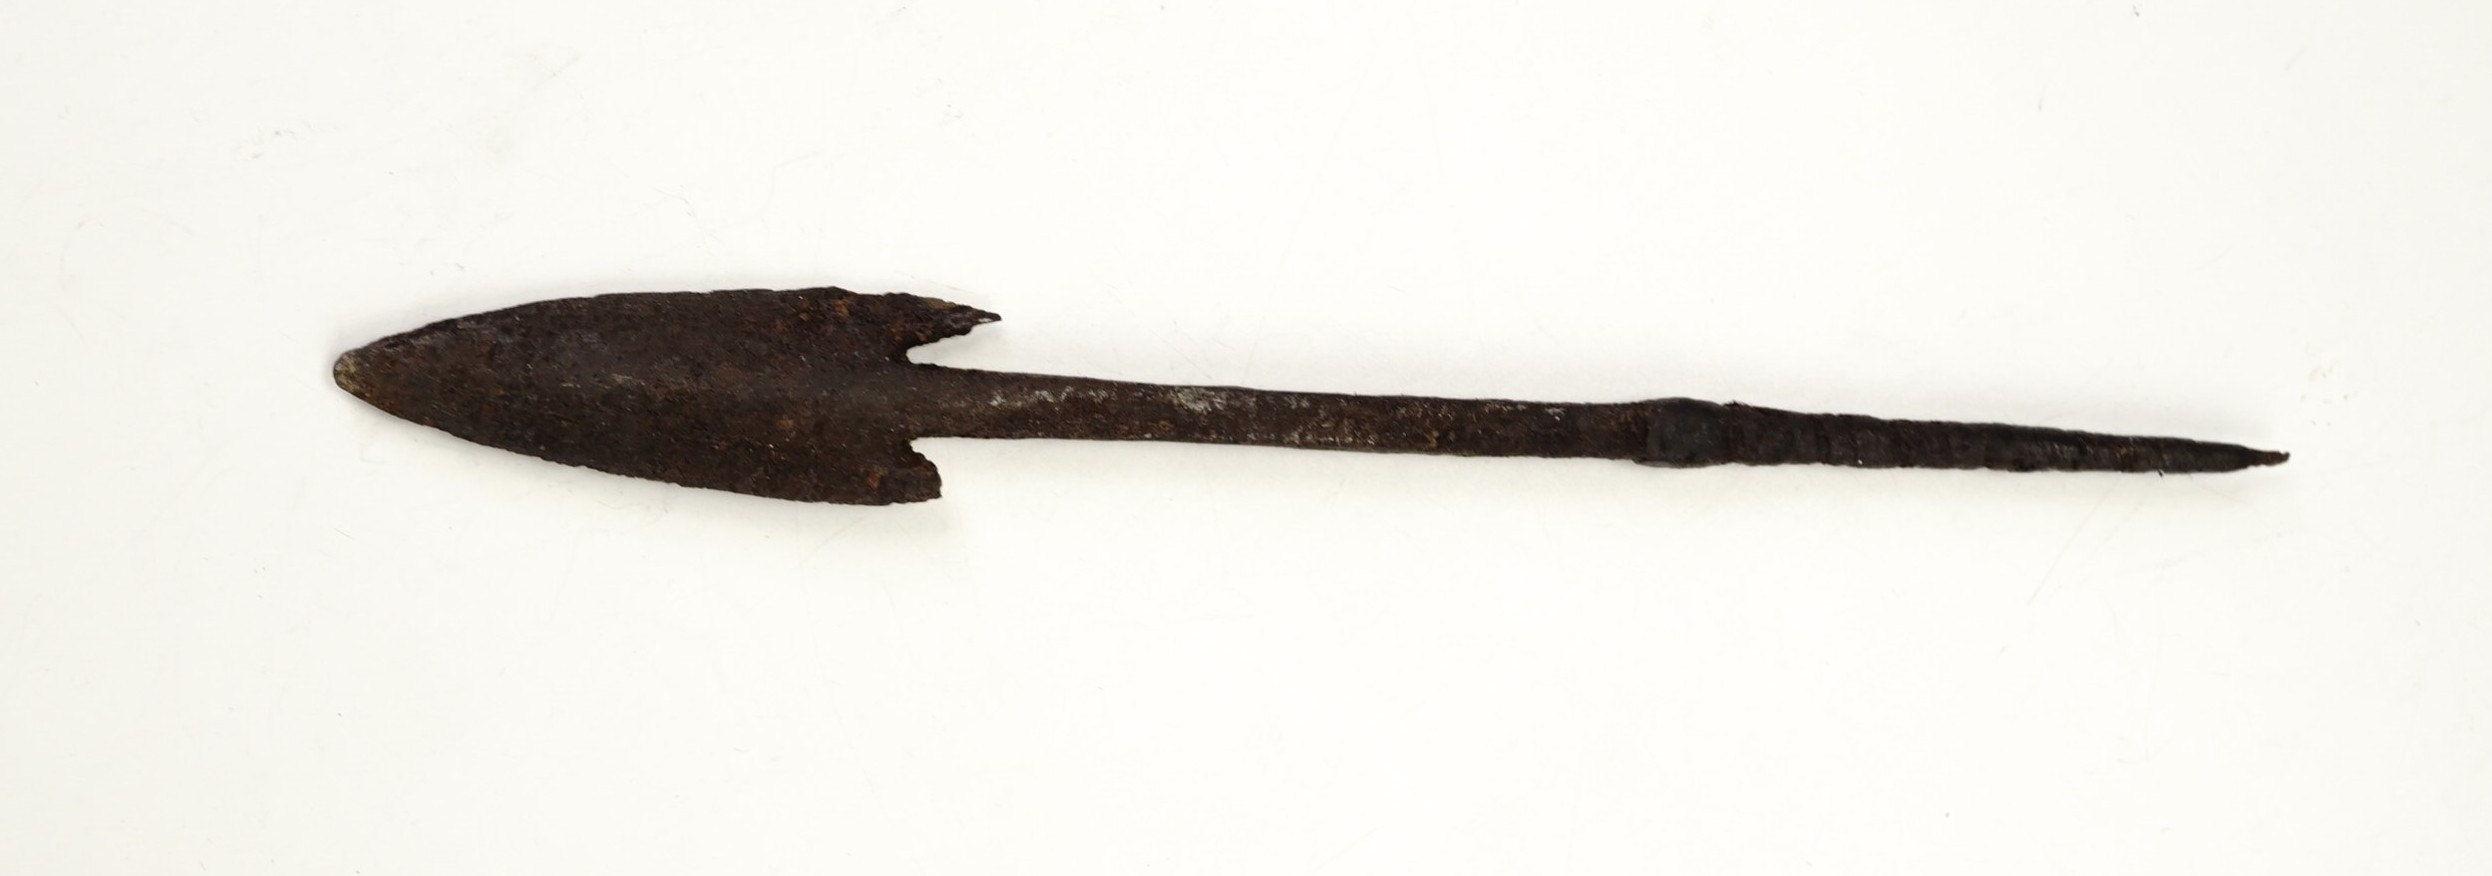 A medieval iron spear or arrow head, of barbed and tanged form, 18 cm - Image 2 of 2